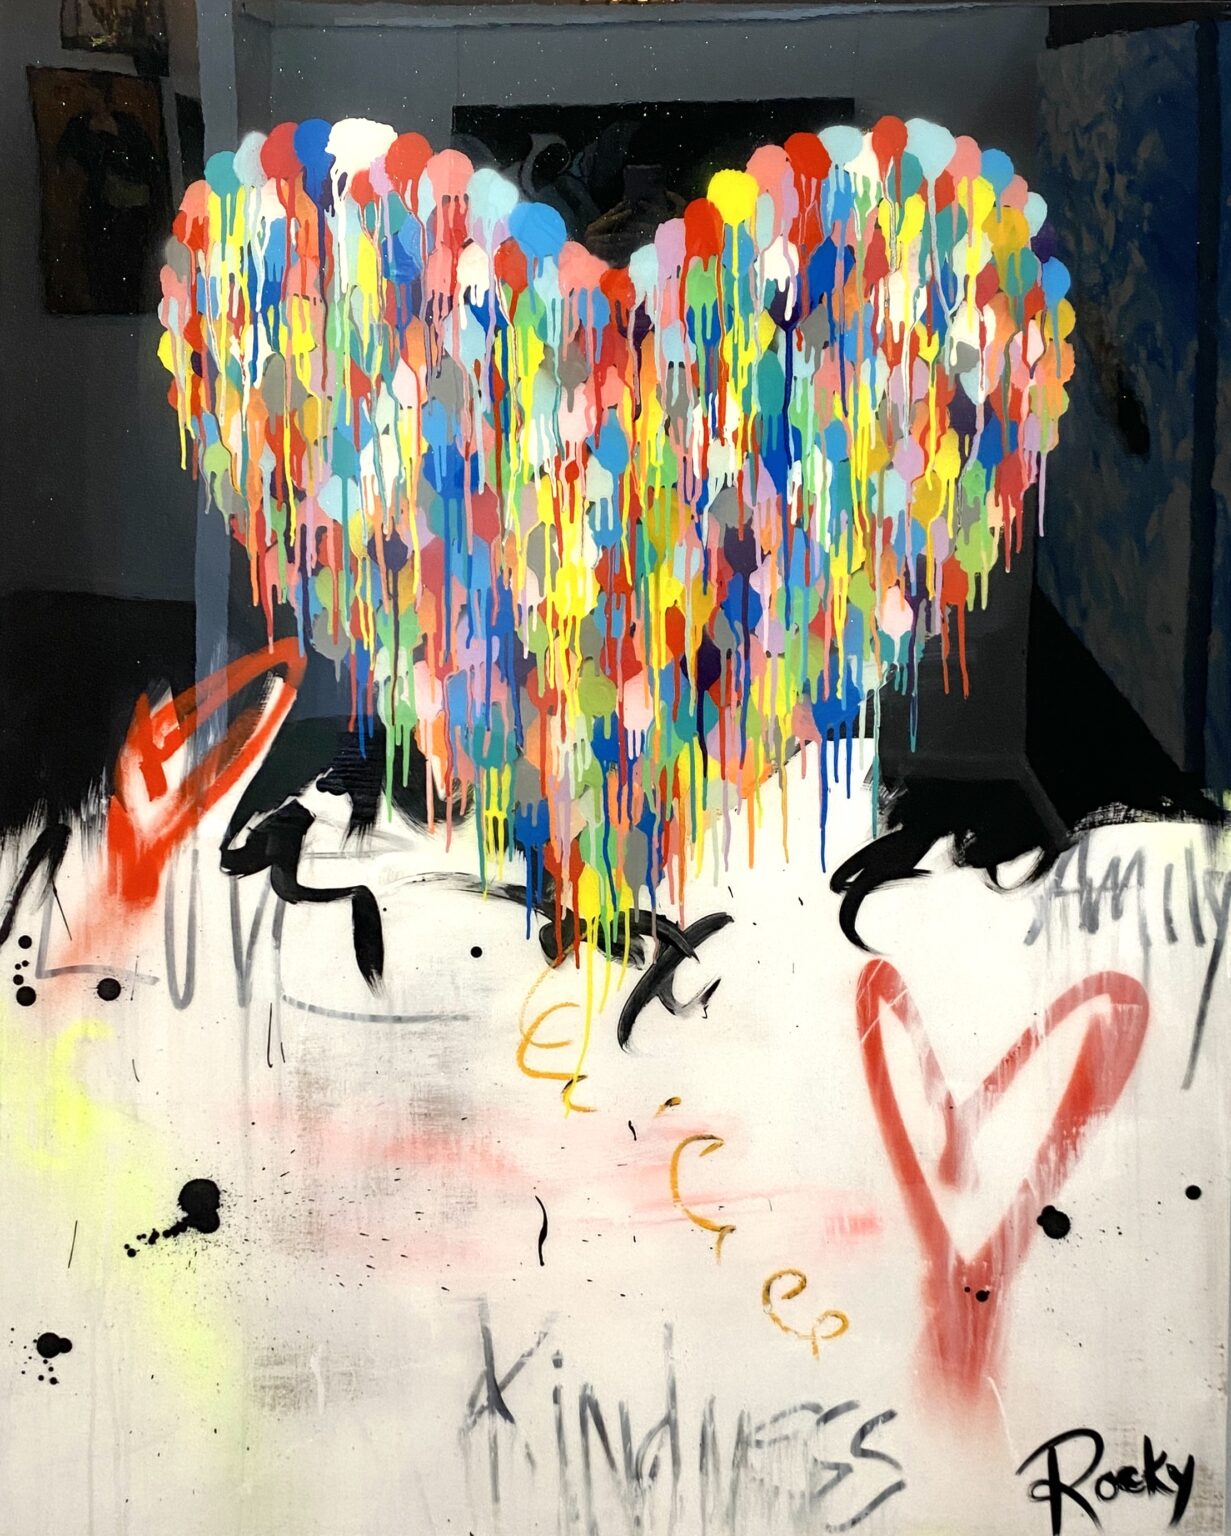 "Love & Kindness" heart acrylic and resin on panel painting by Rocky Asbury